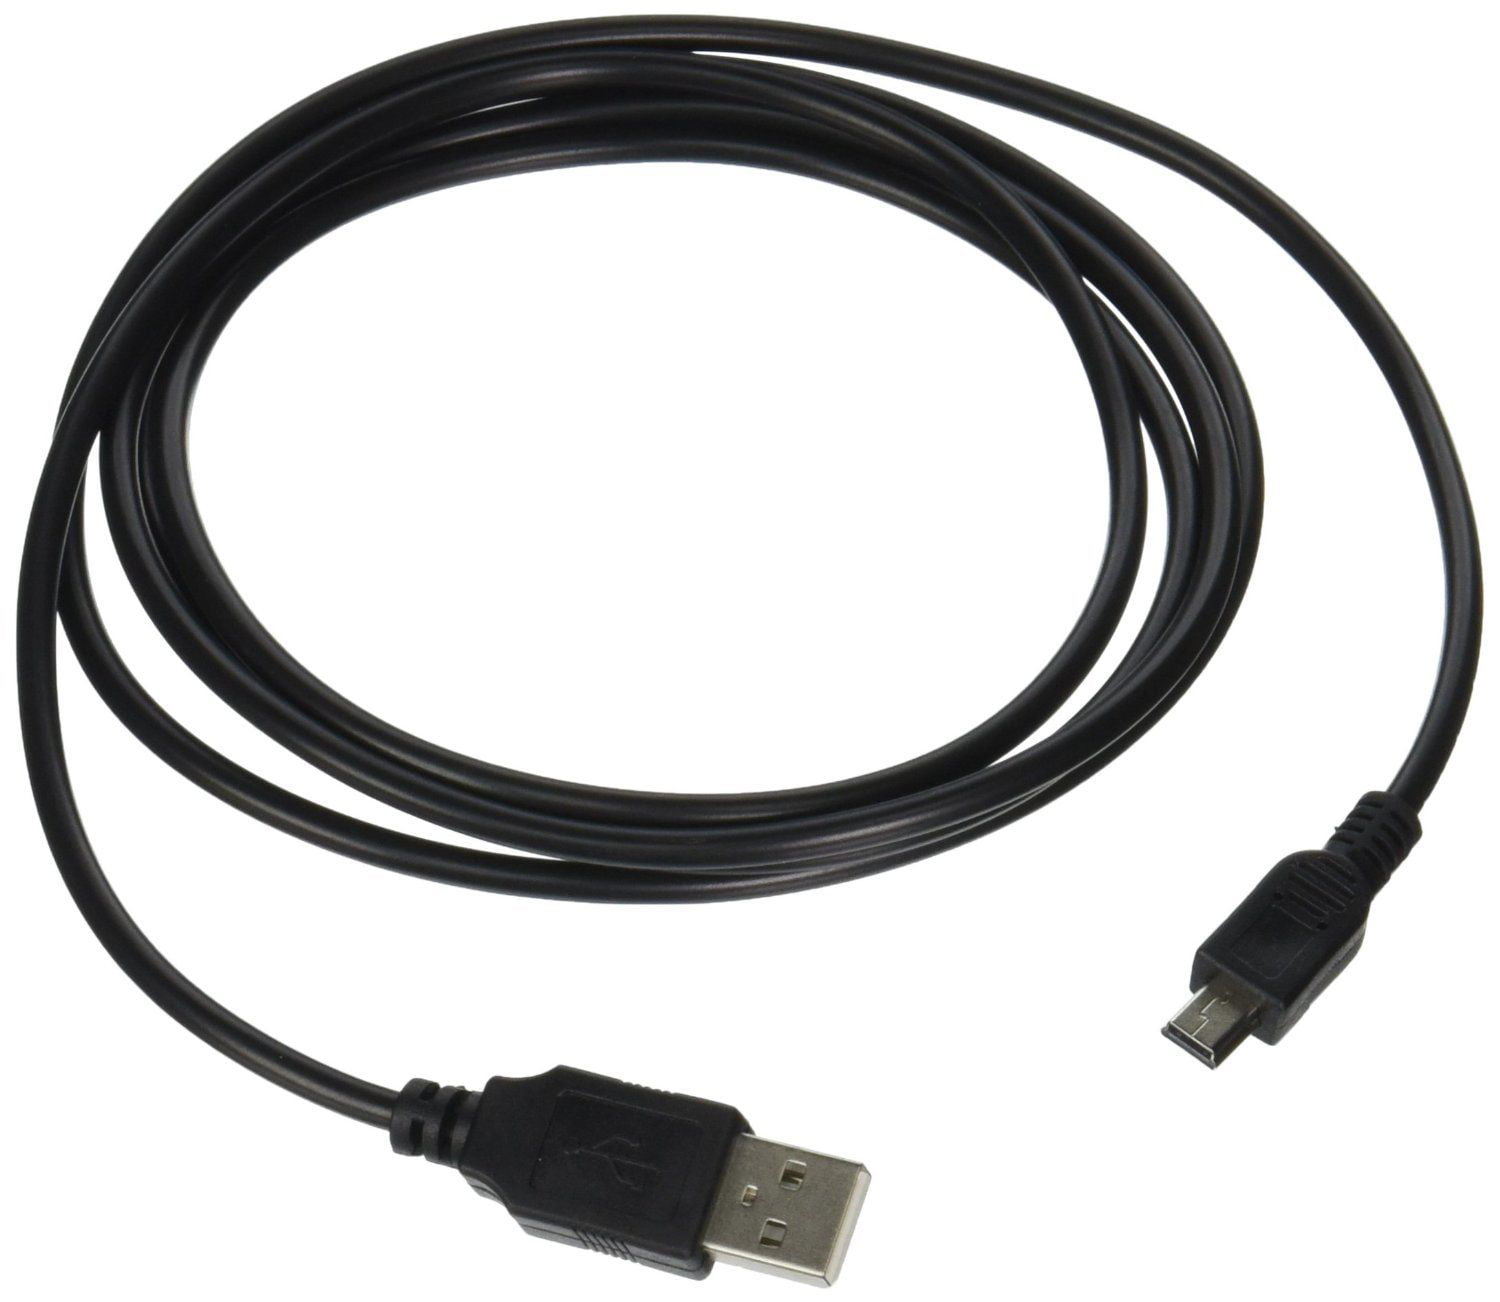 USB SYNC DATA TO PC CHARGER CHARGING CABLE CORD FOR GOPRO HERO3 HERO3 HERO4 